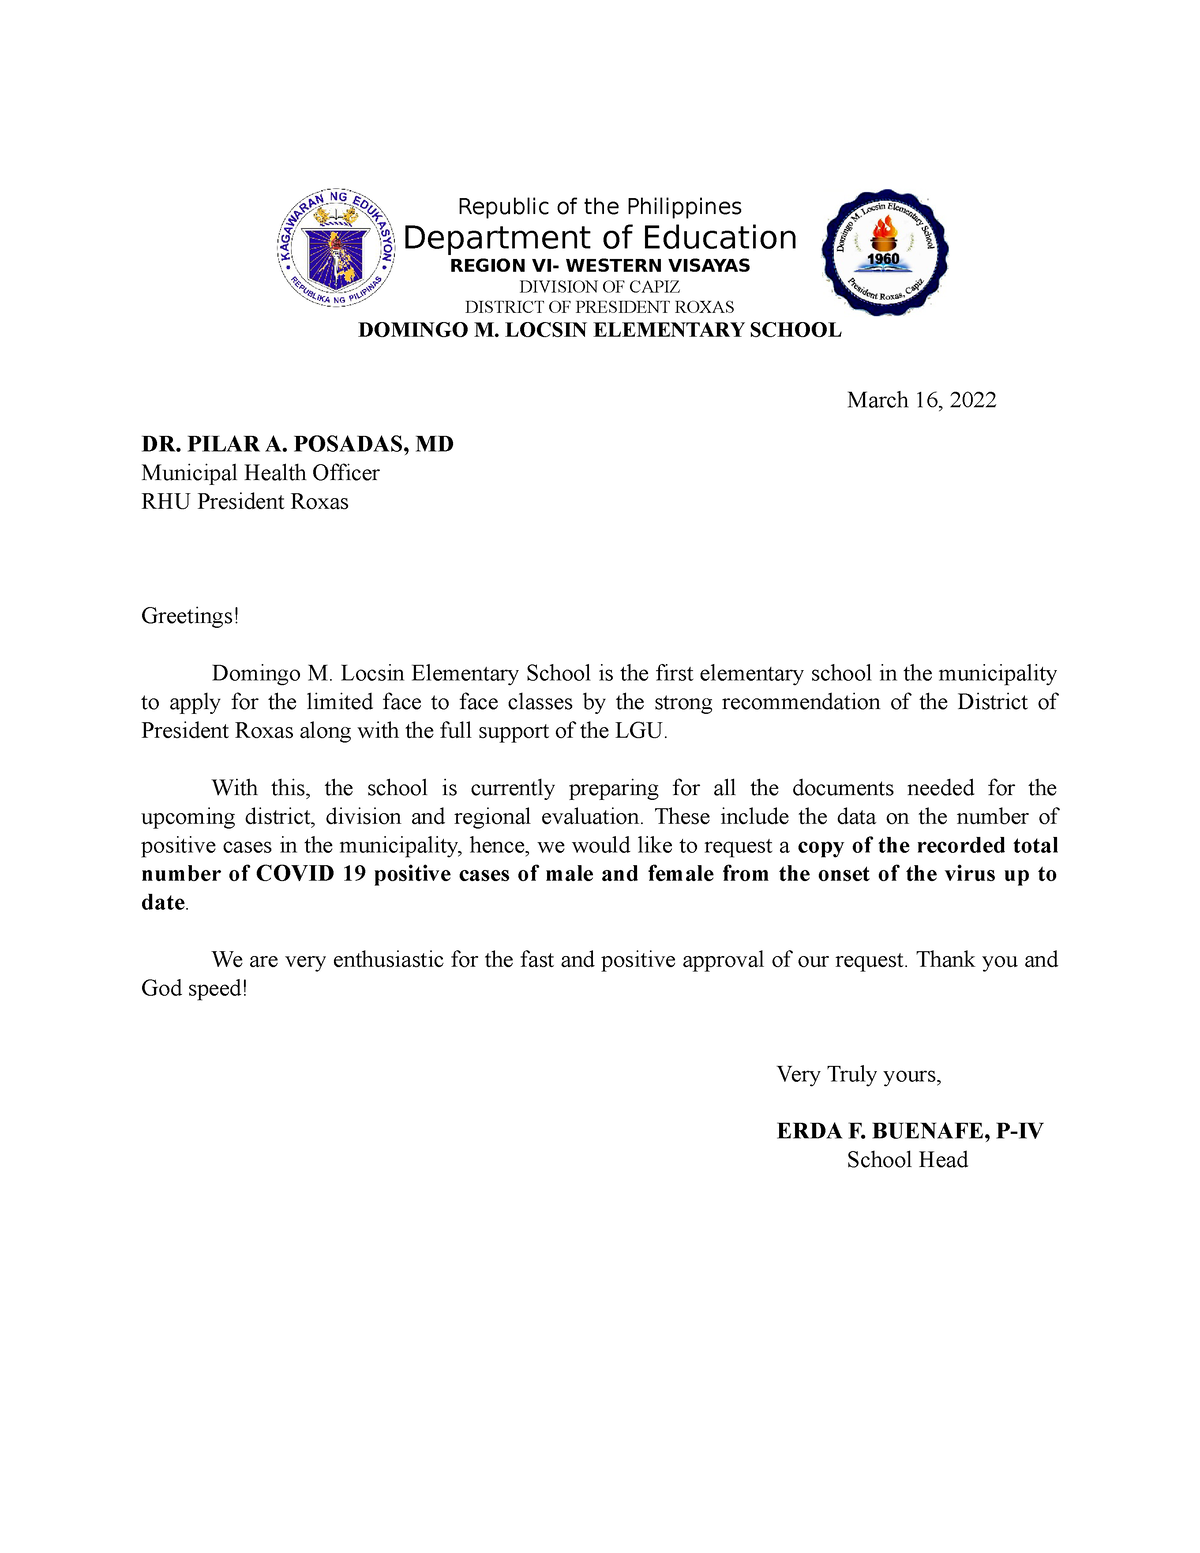 example of application letter for lgu